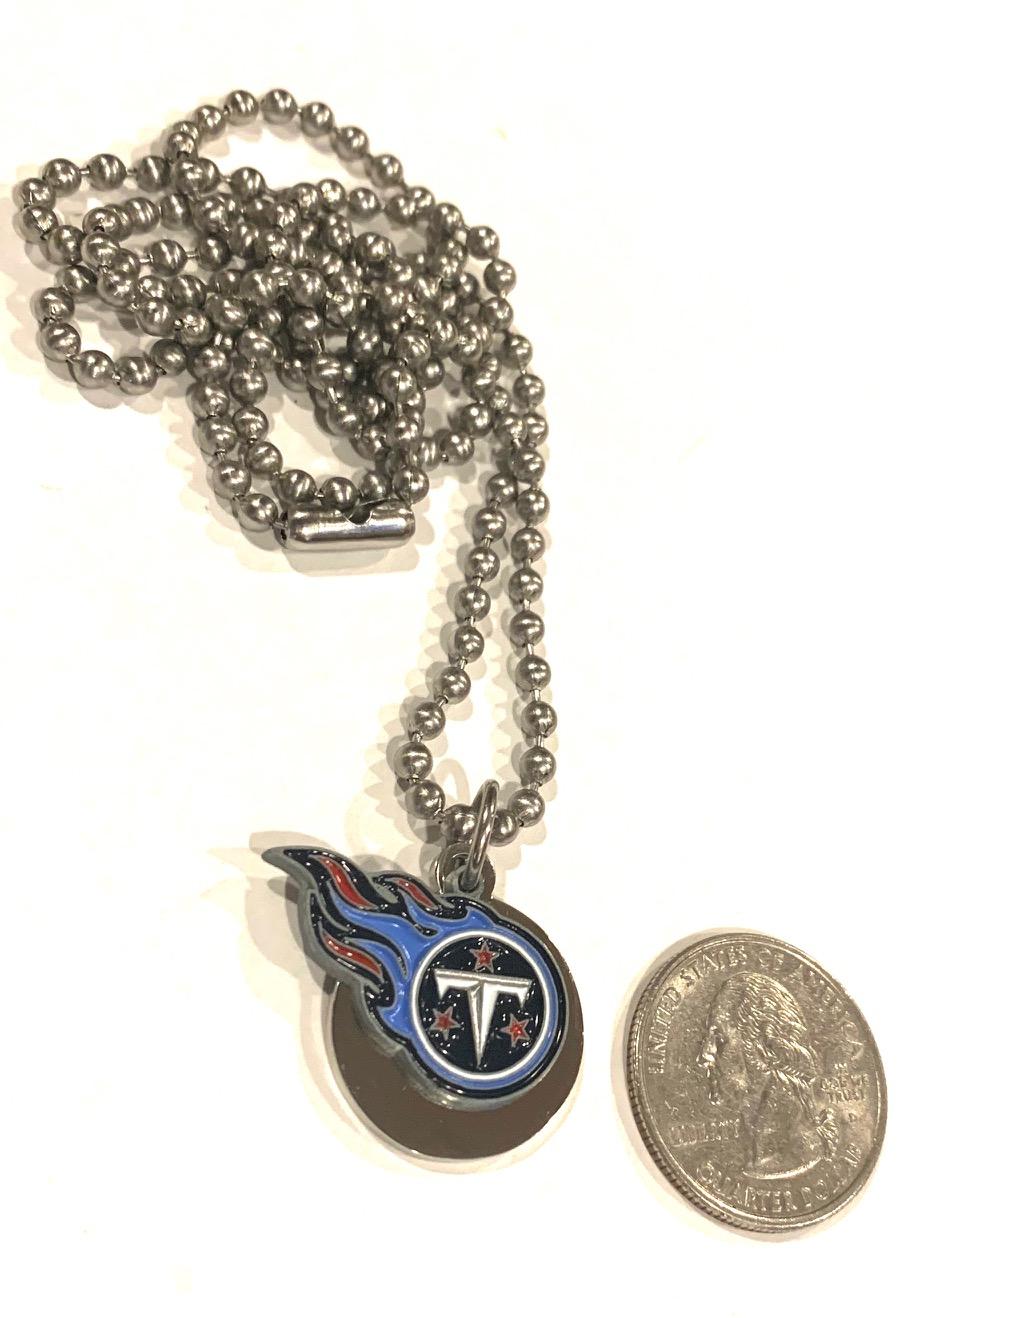 TENNESSEE TITANS ROUND SMALL NFL  STAINLESS STEEL DOG TAG NECKLACE   BALL CHAIN PENDANT - Samstagsandmore